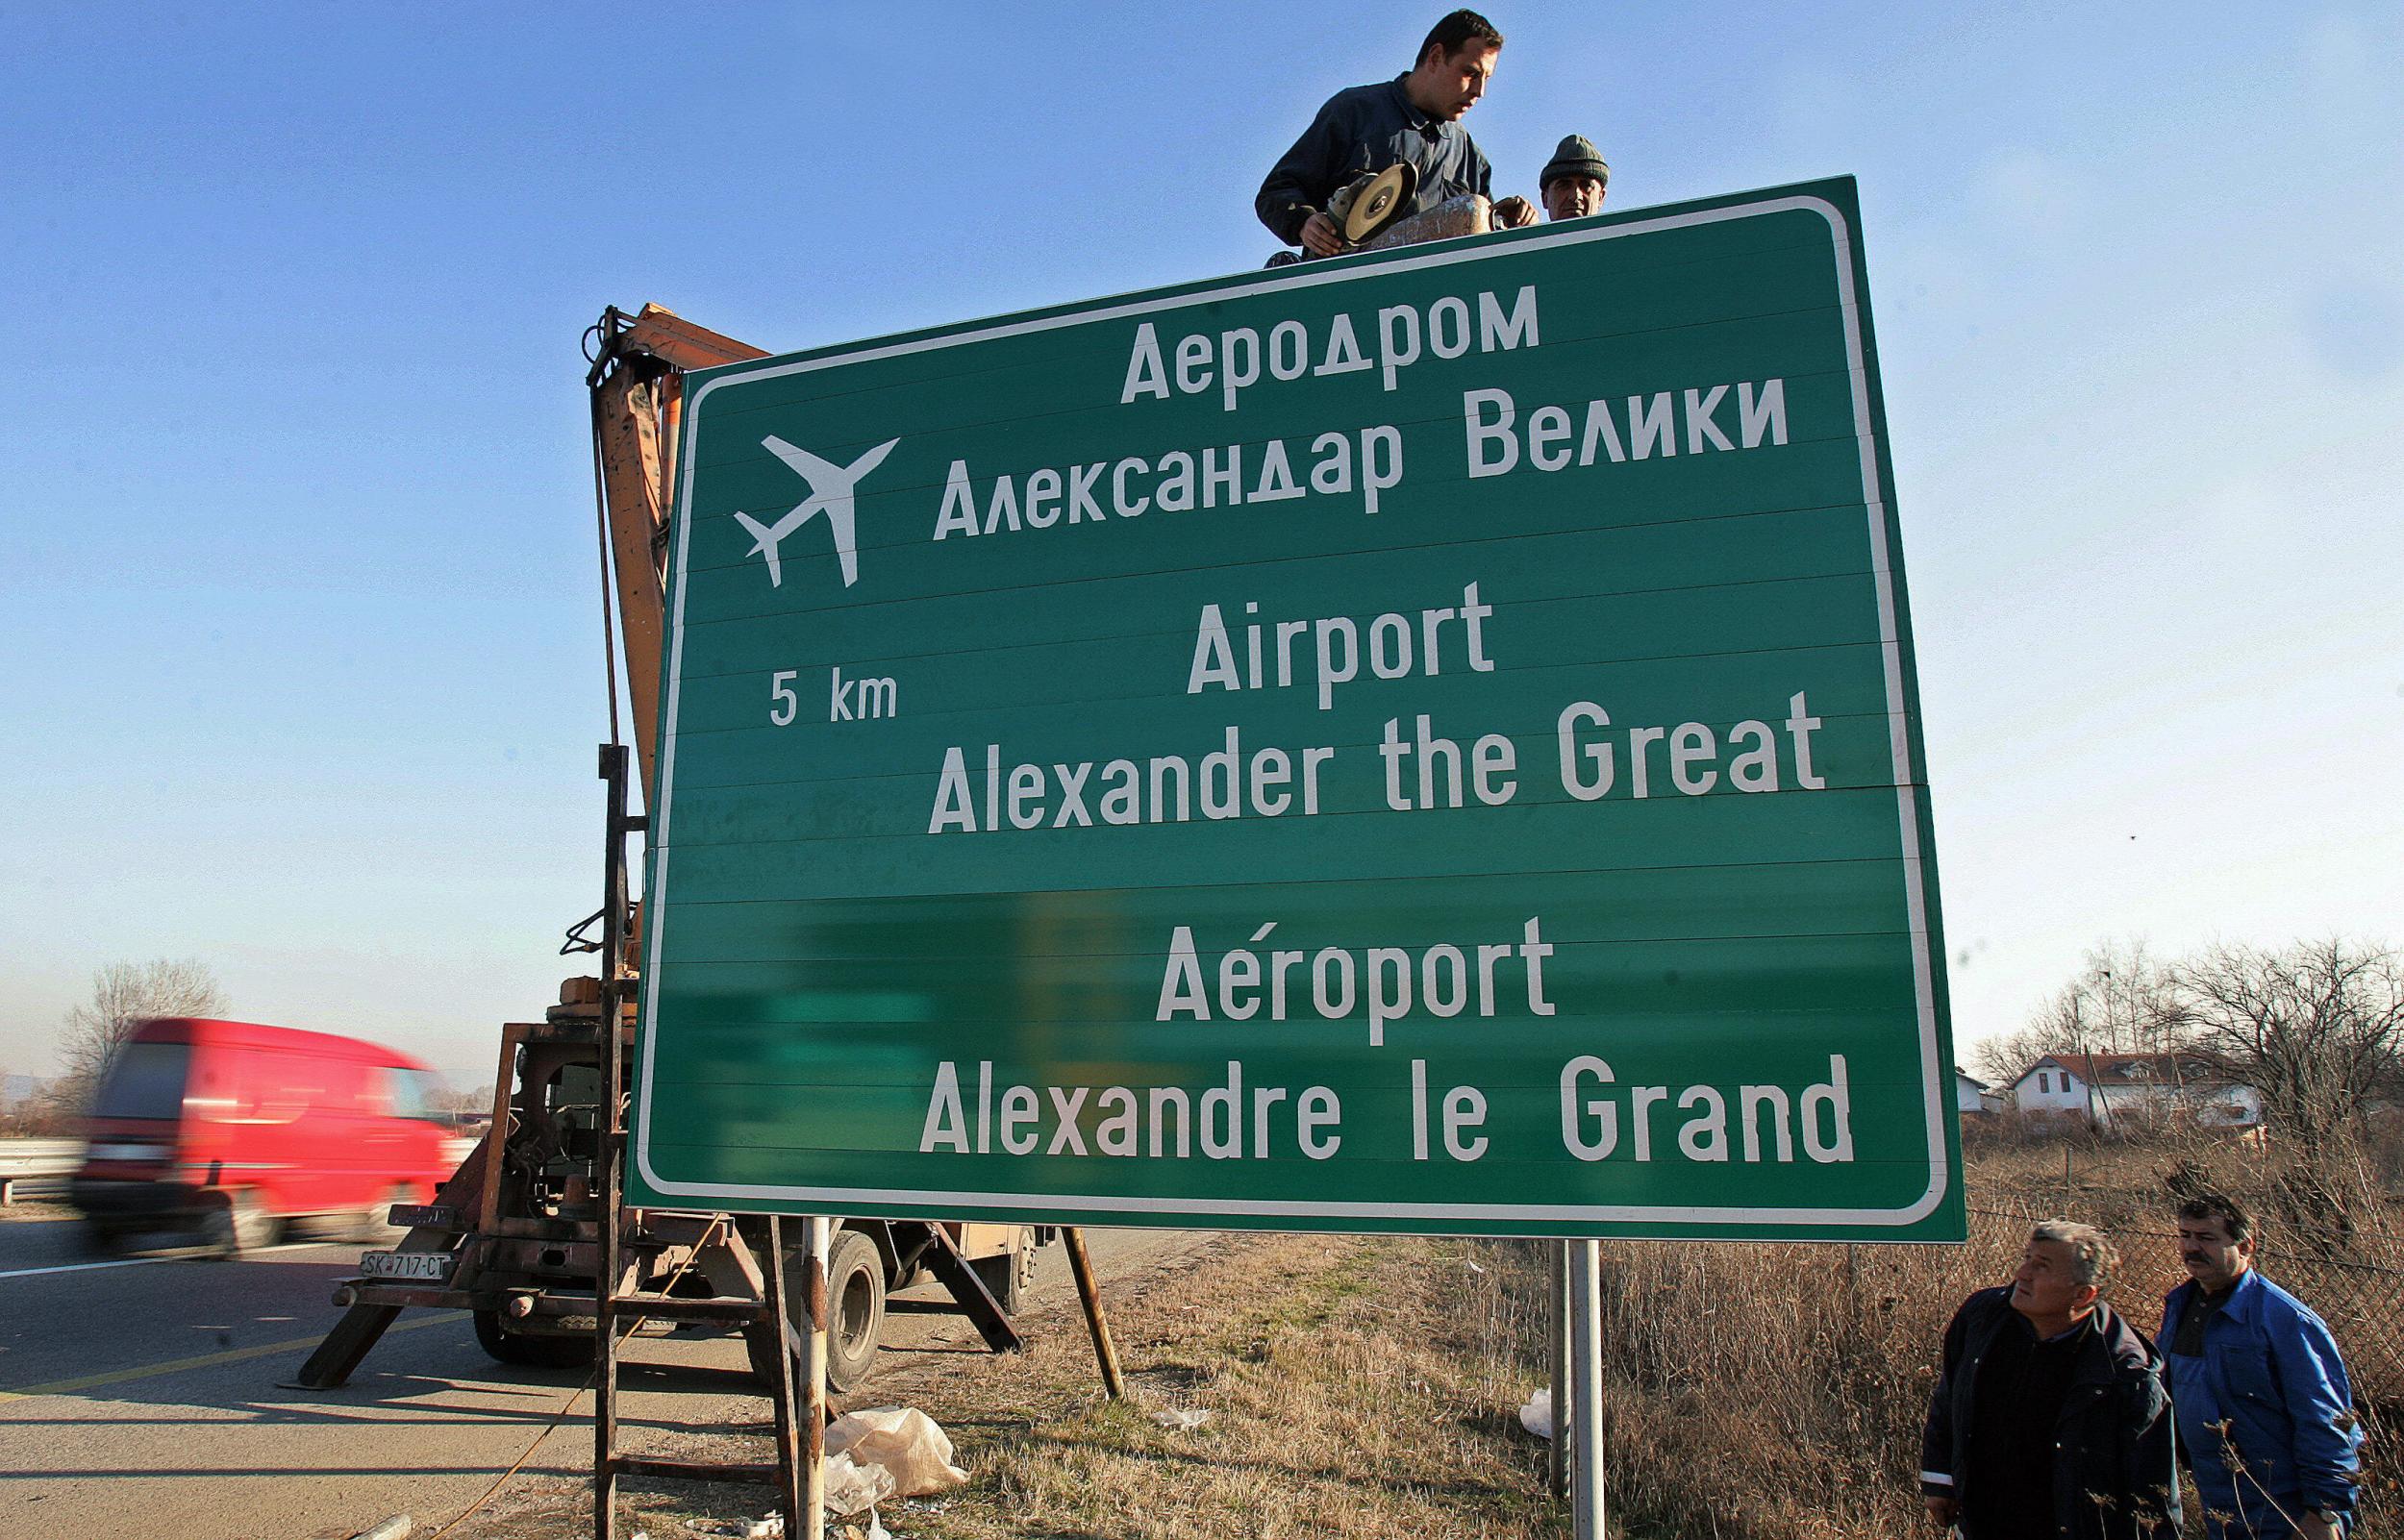 Alexander the Great airport will be renamed